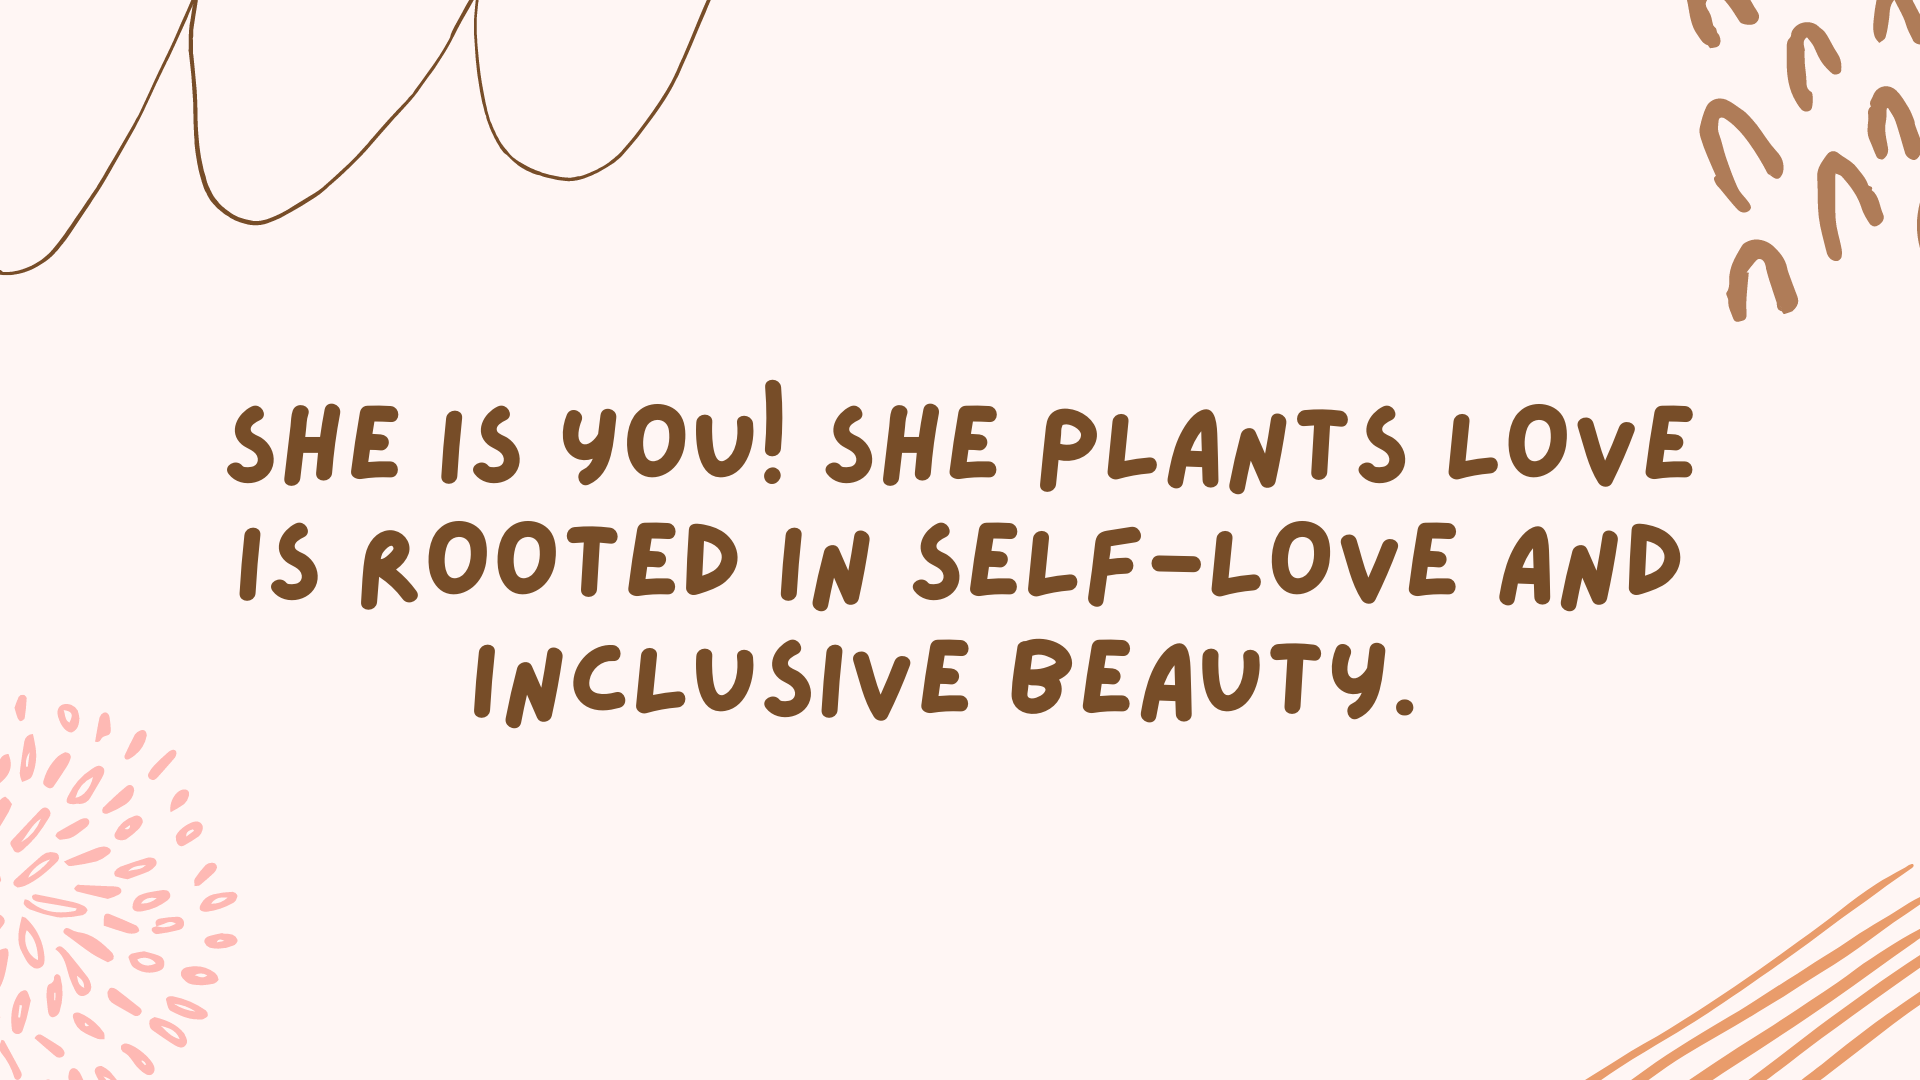 She Plants Love brand images 